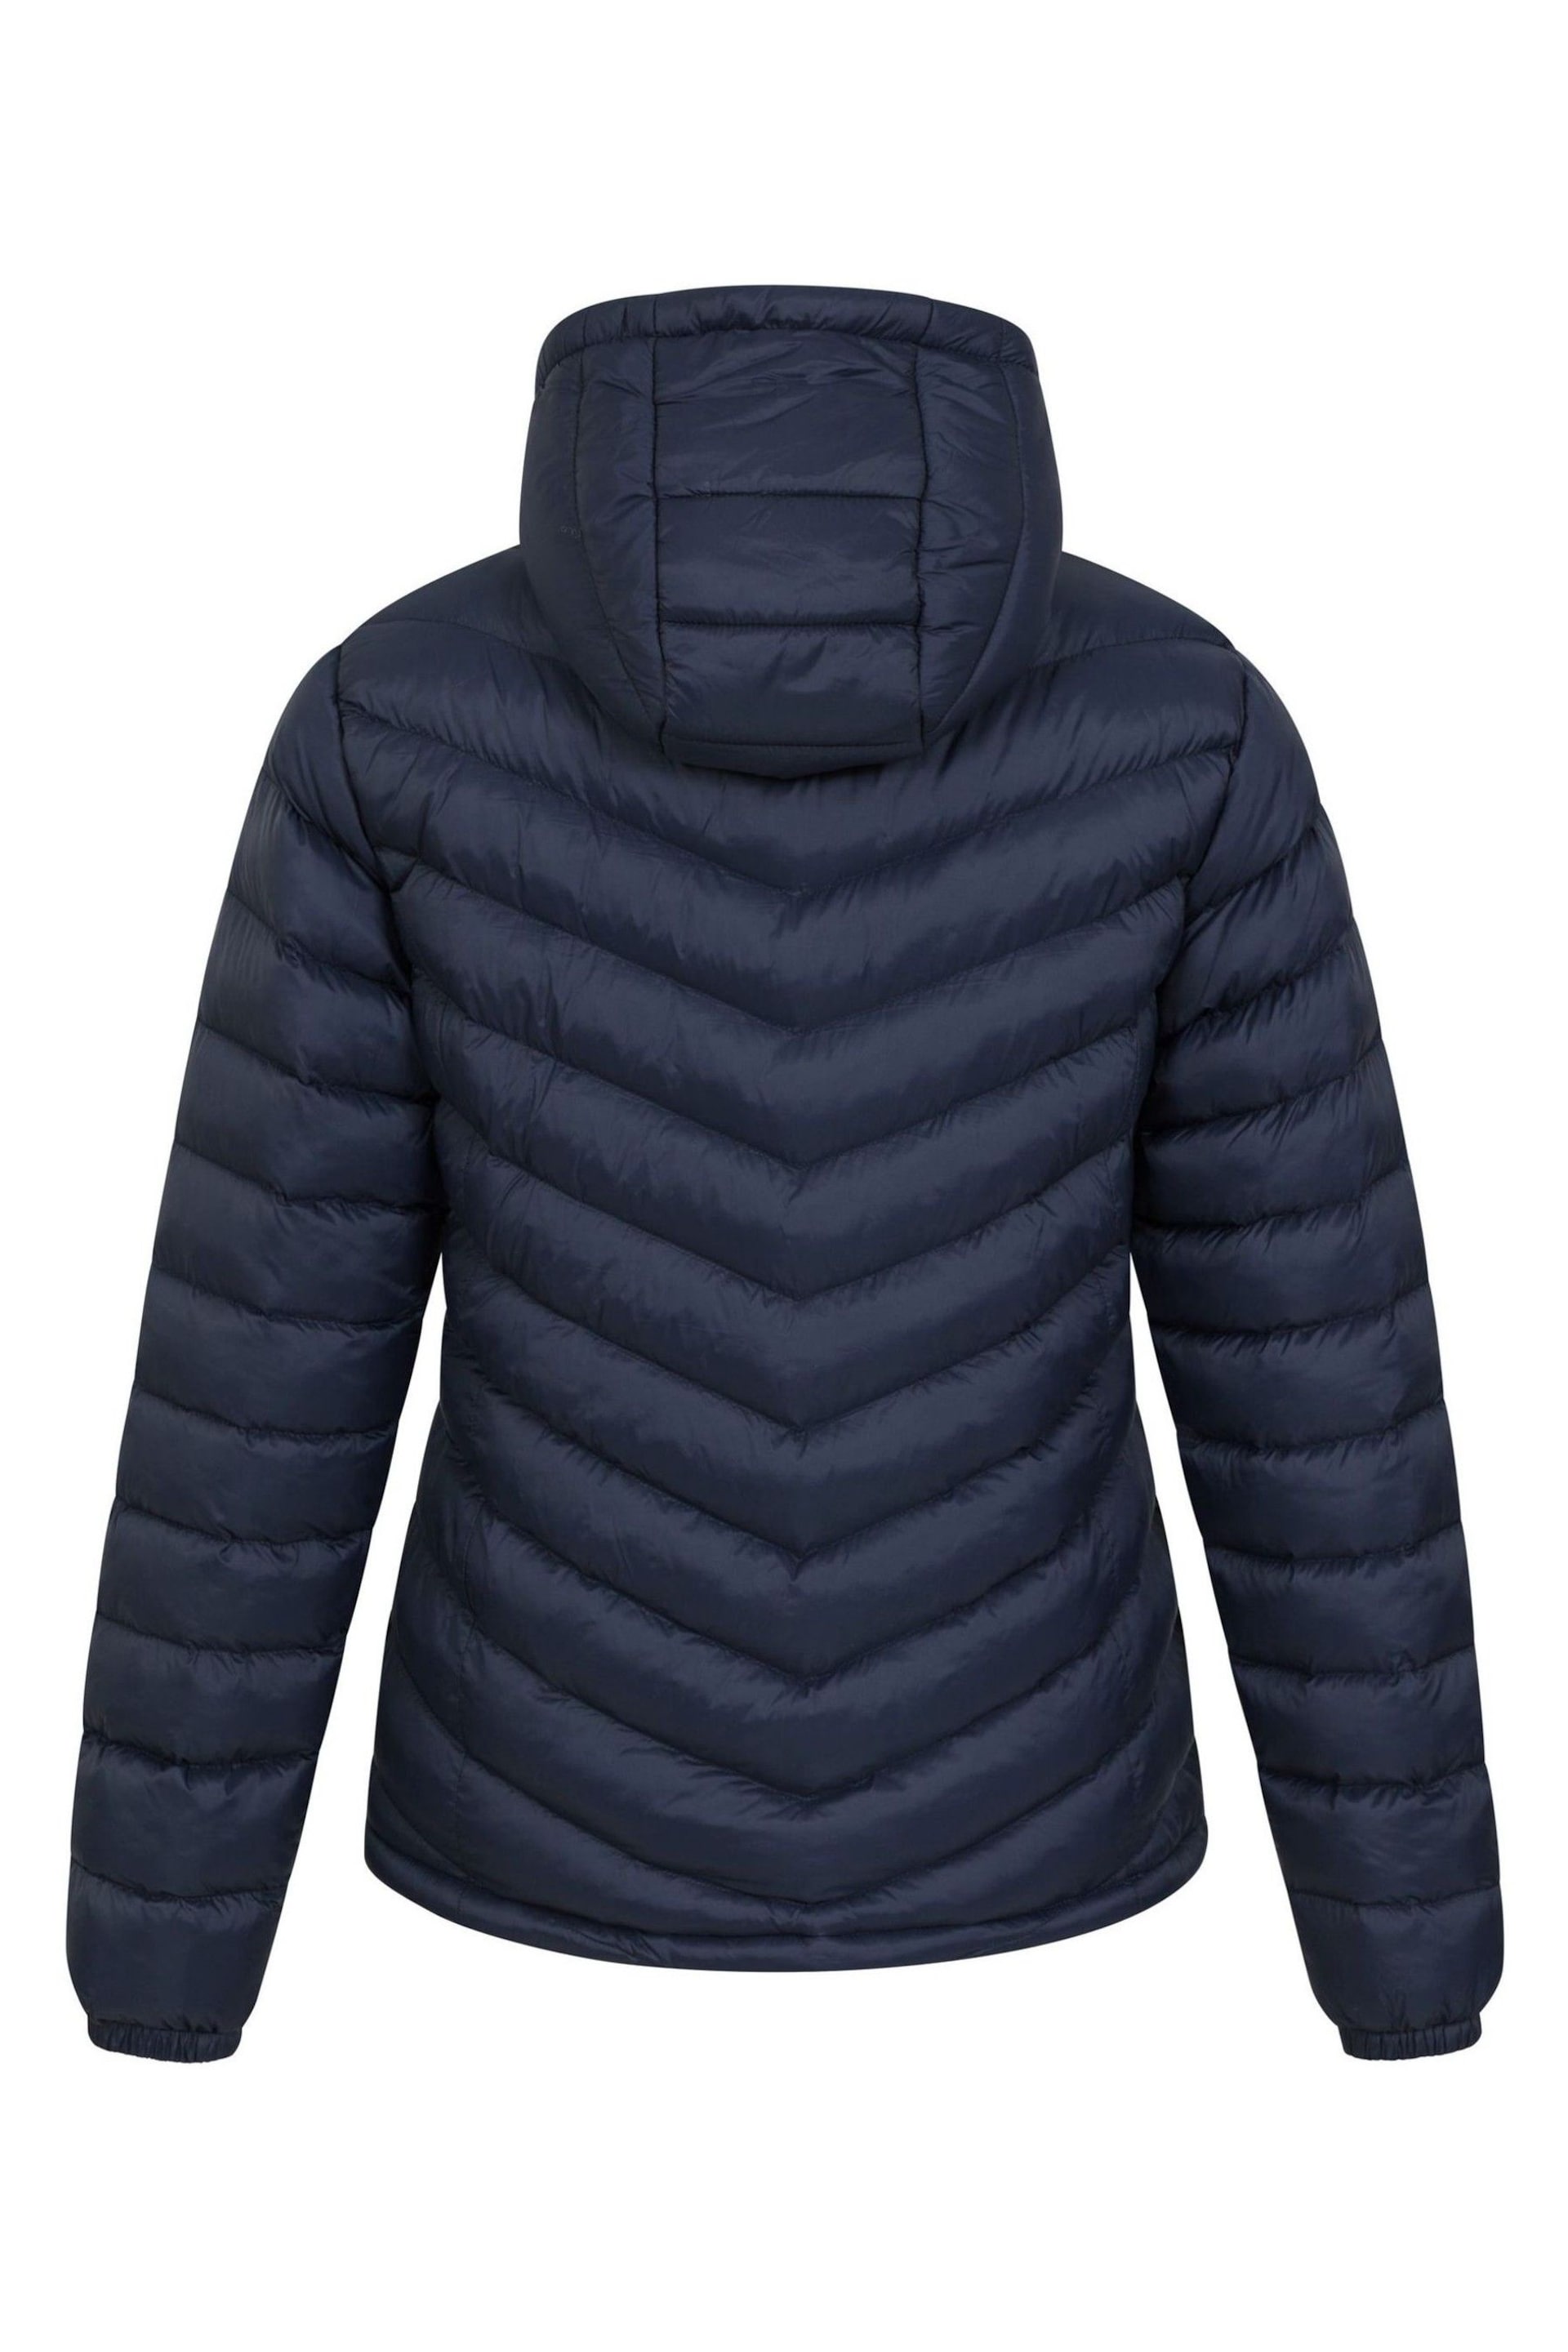 Mountain Warehouse Blue Womens Seasons Water Resistant Padded Jacket - Image 9 of 9